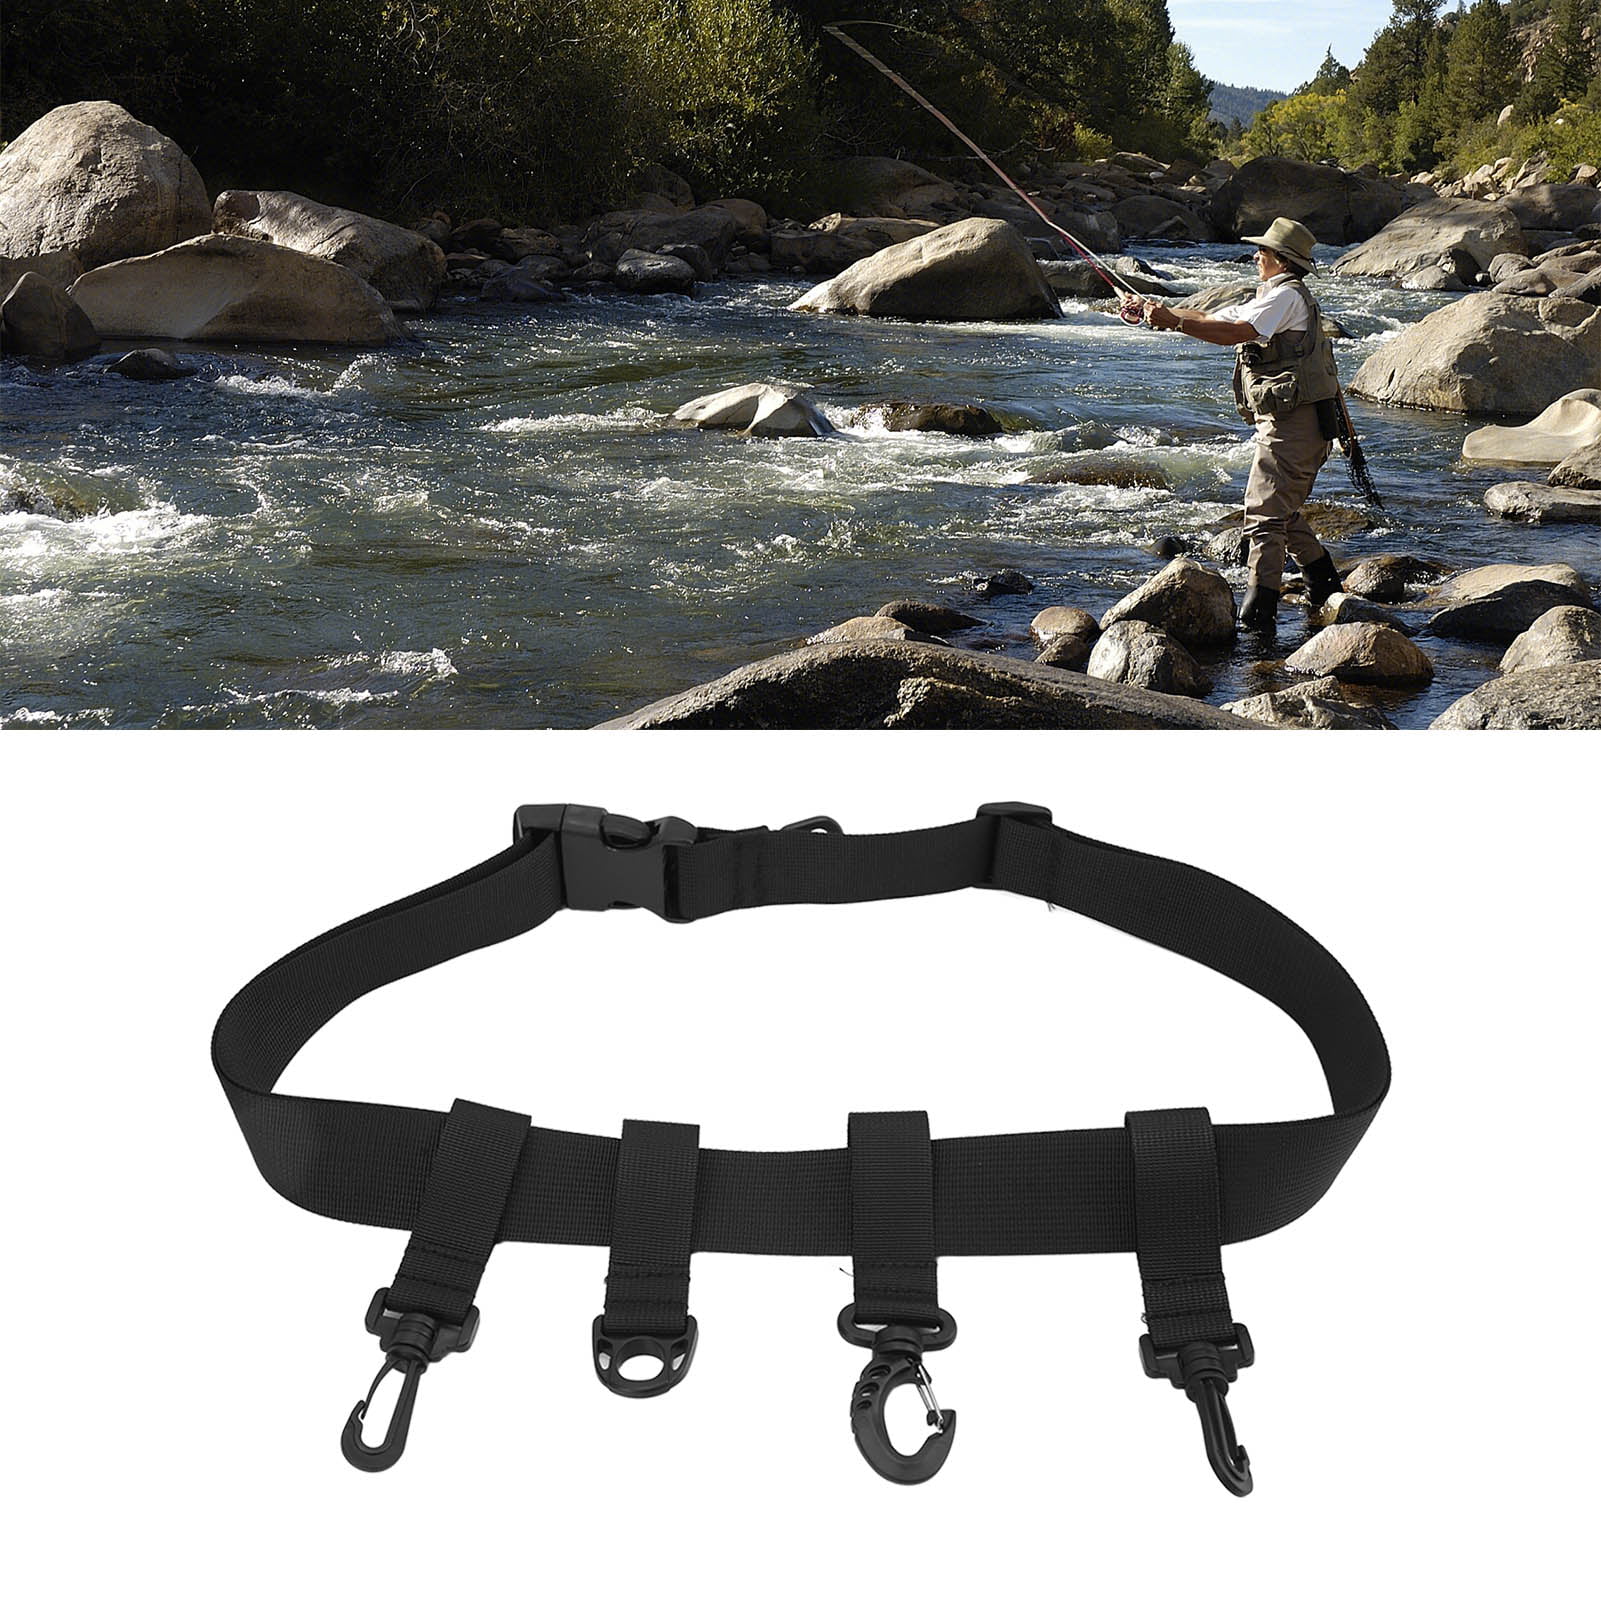 Wading belt fishing gear fly fishing breathable chest waders fishing belt 